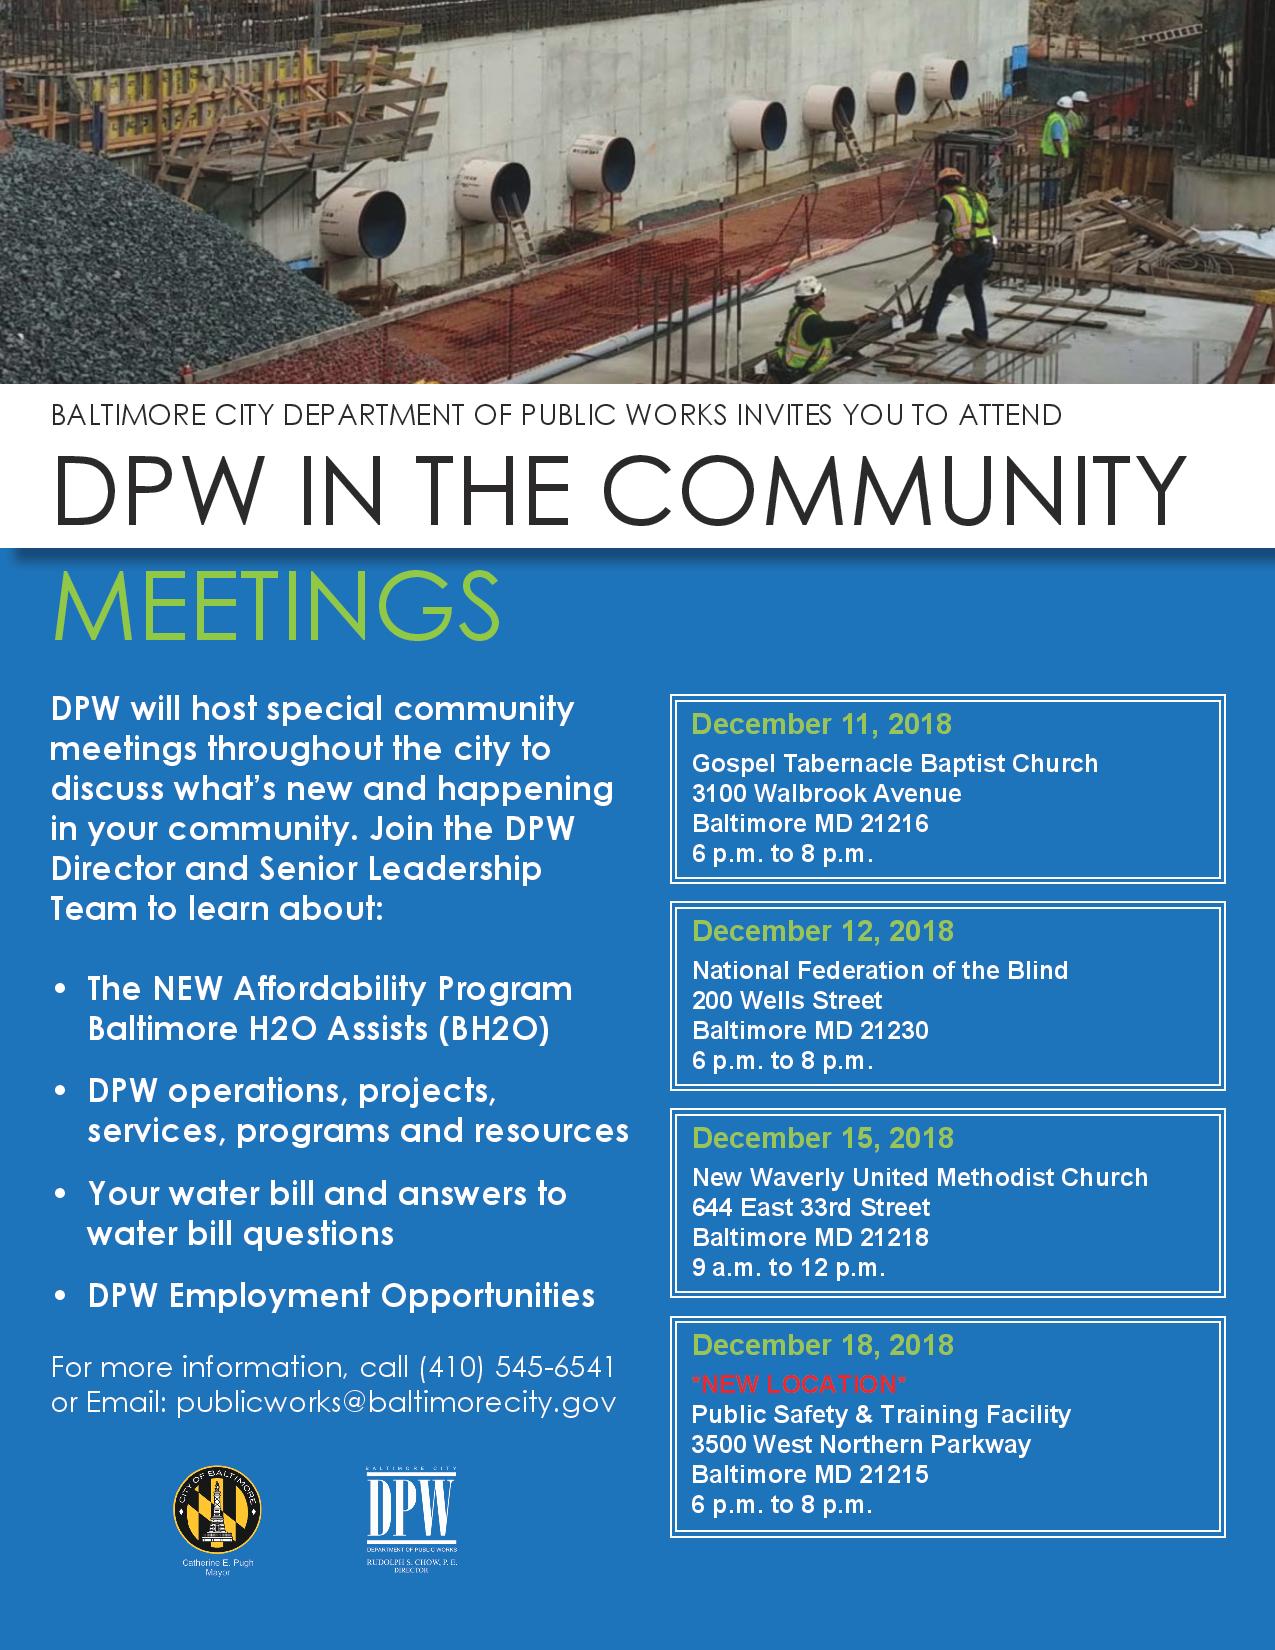 DPW in the Community Meeting